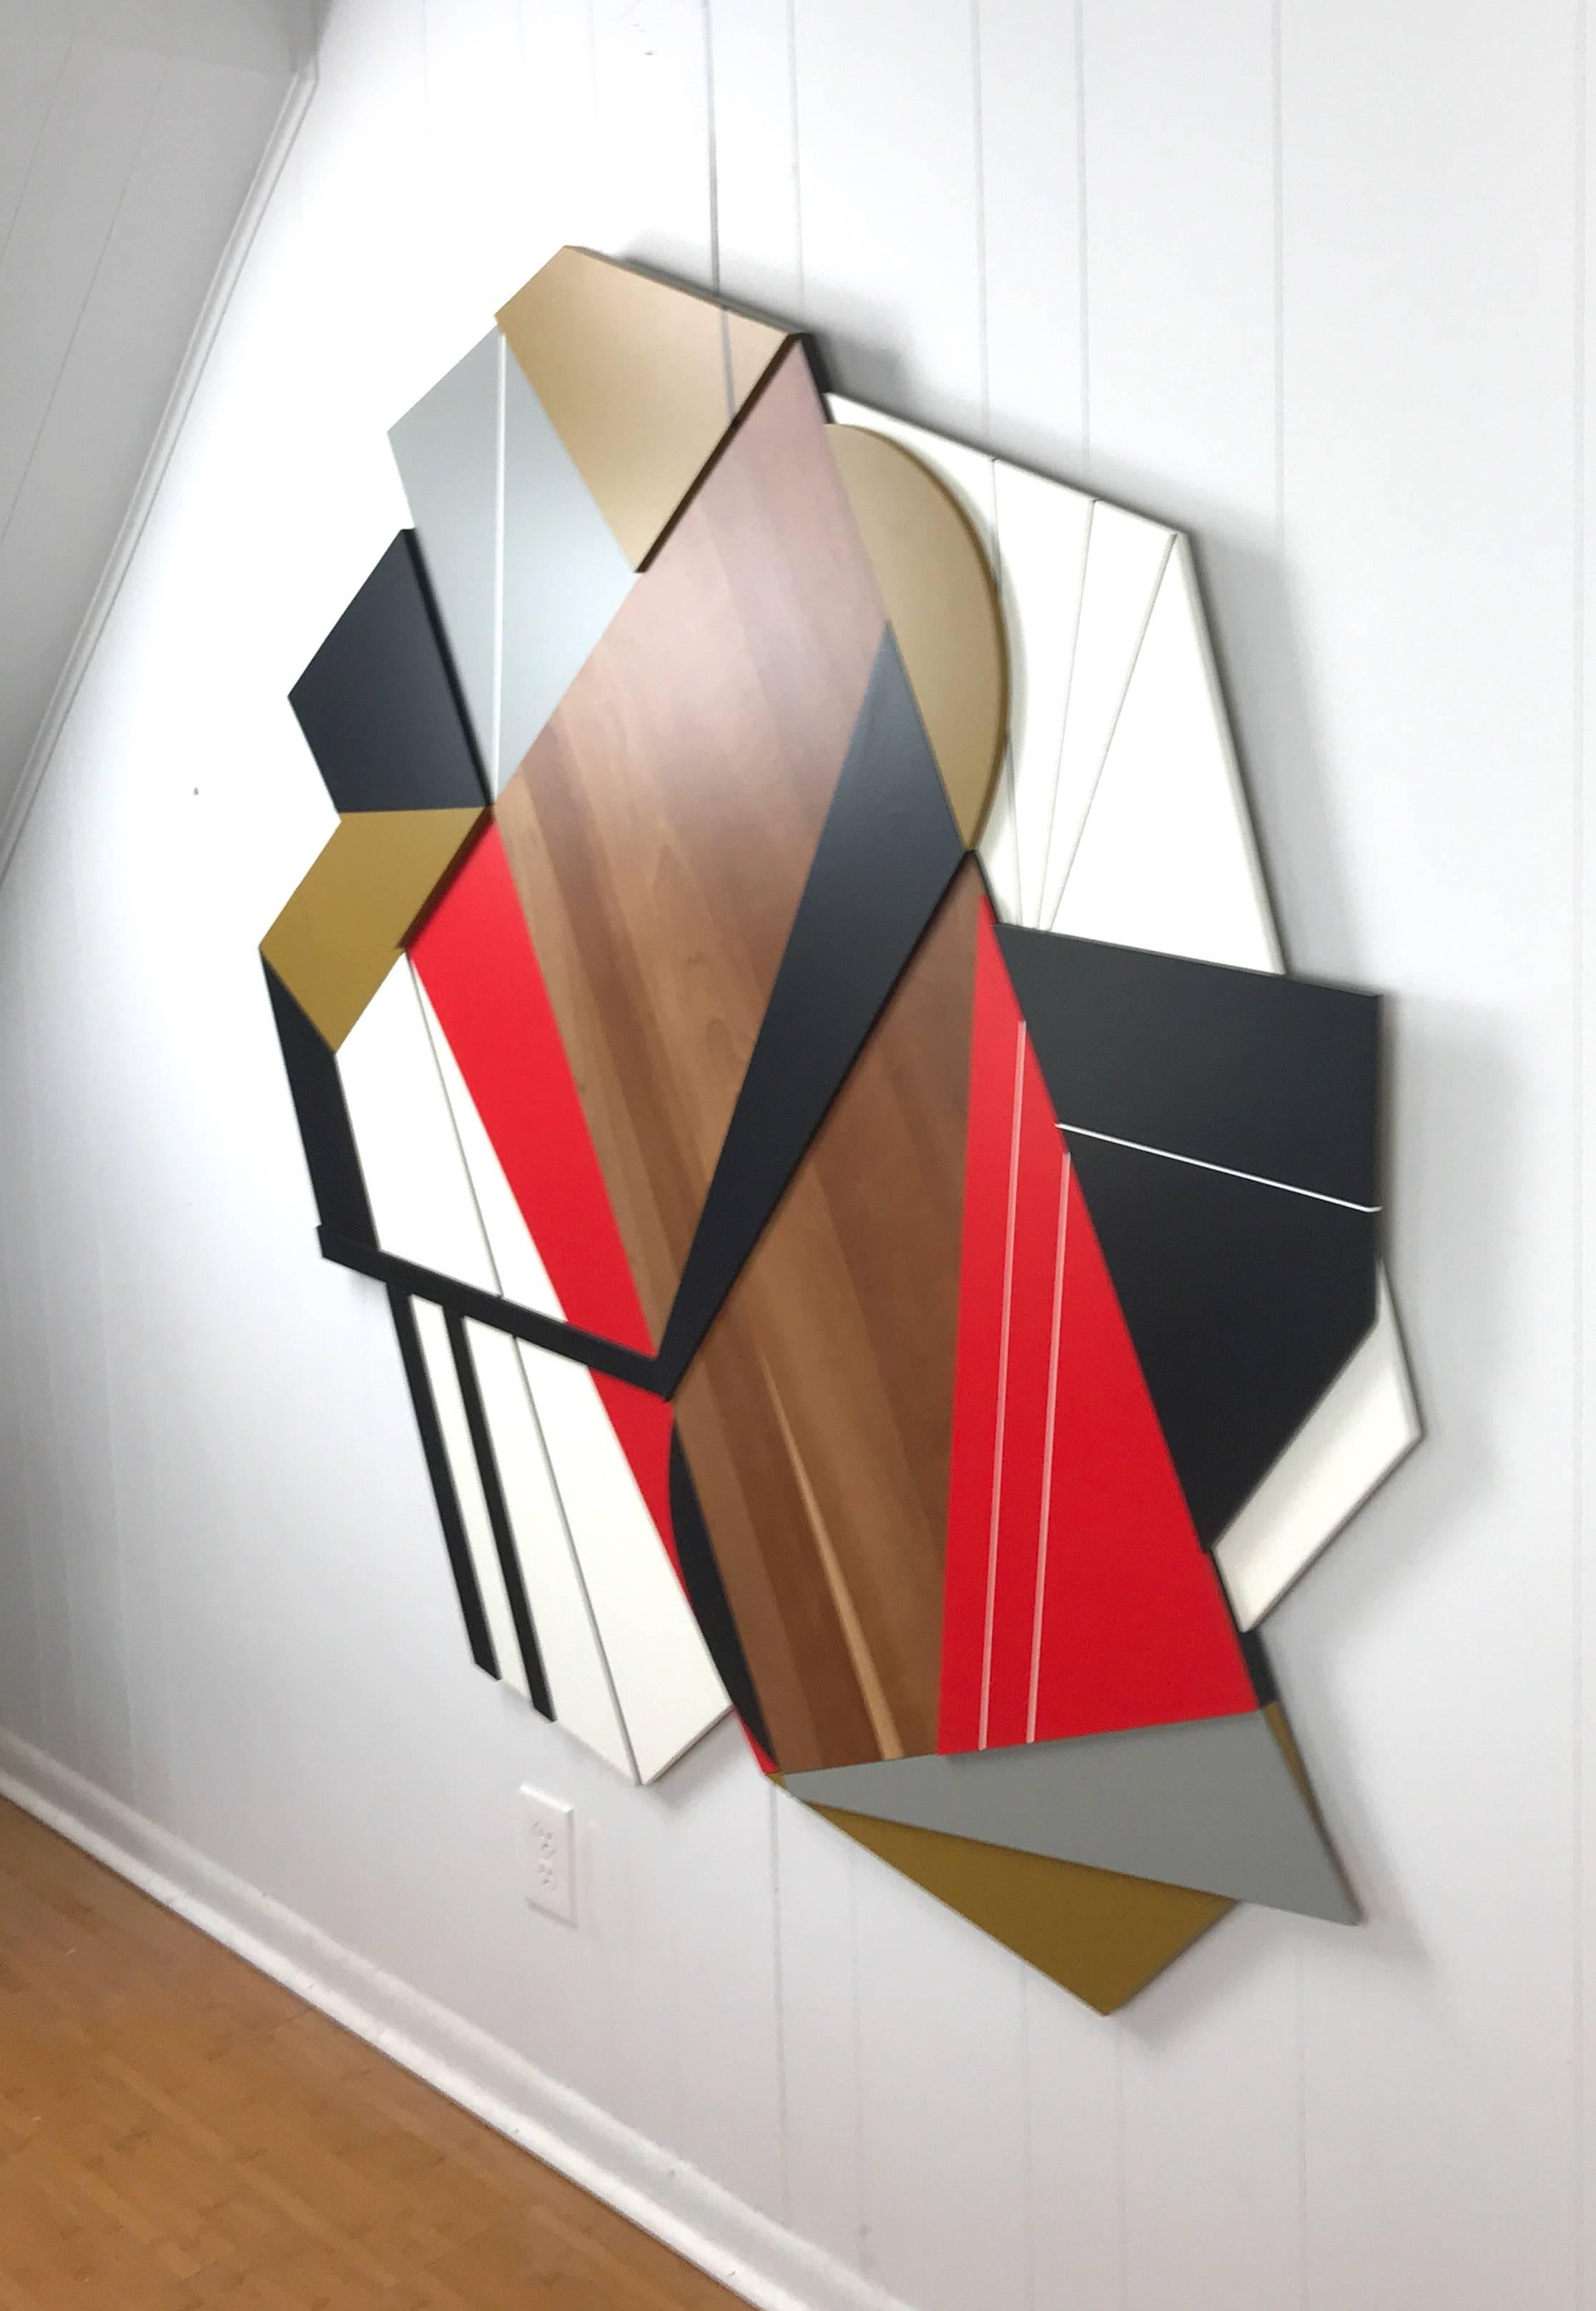 Achtung is a vibrant large-scale mixed media wall sculpture. The solid American cherry hardwood panel was repurposed from a 70-year-old wood dining room table. Layers of MDF panels are then laid on top of the cherry to create dimension and movement.